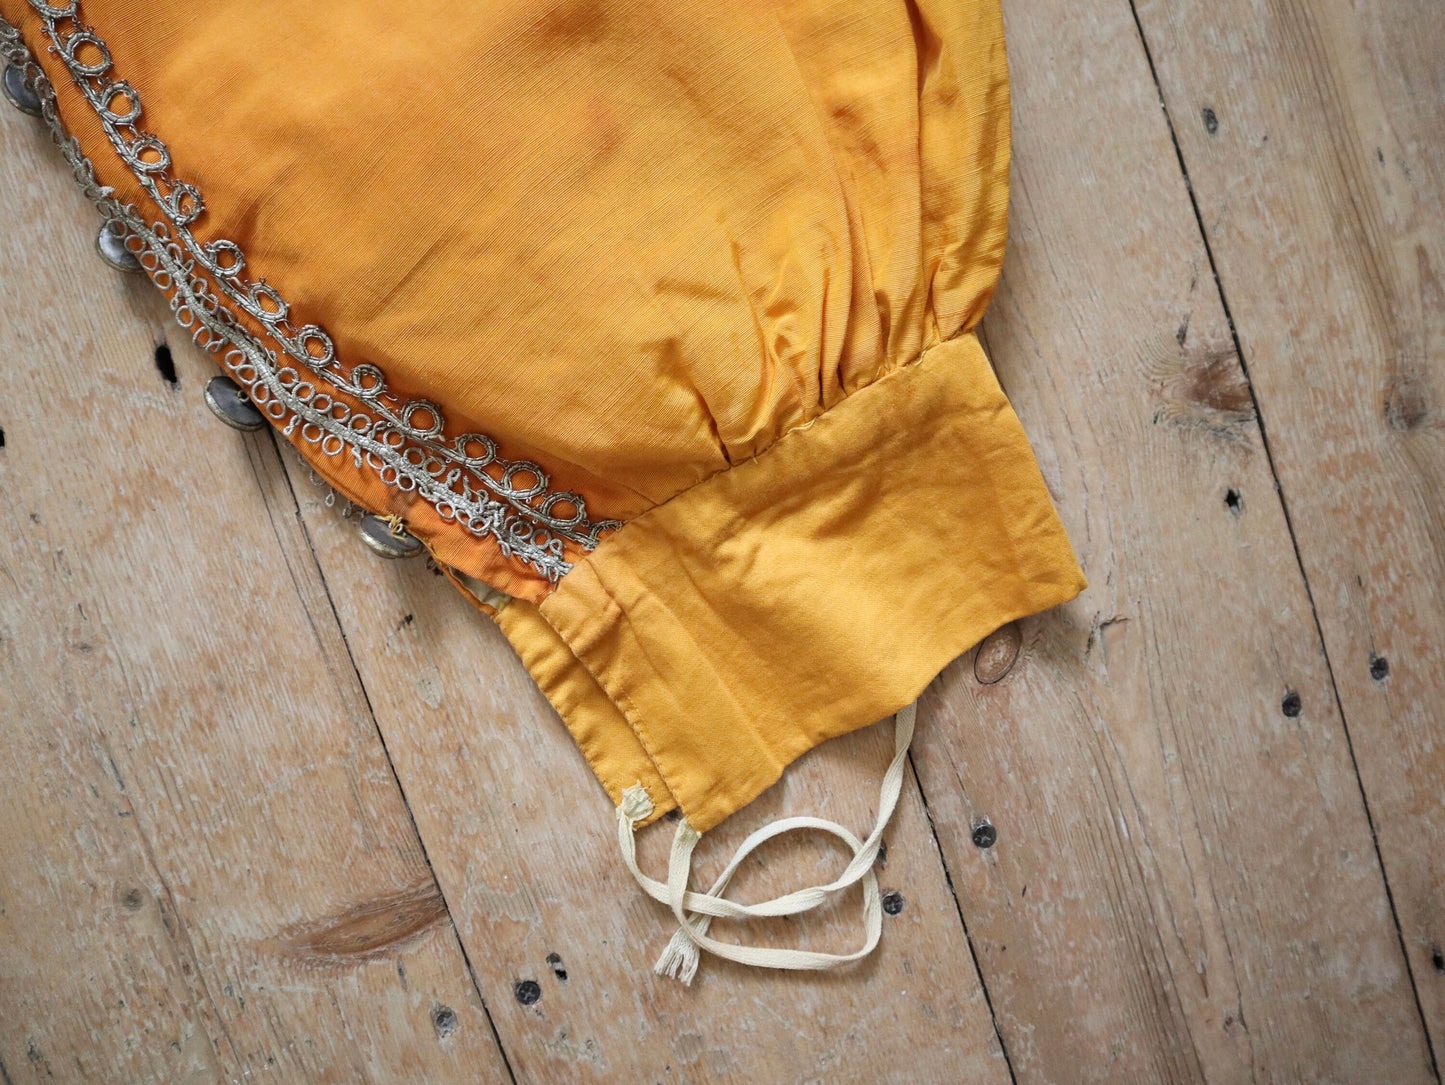 Antique Early 1900s French Yellow Silk Grosgrain Breeches Pants Gold Metal Thread embellishments